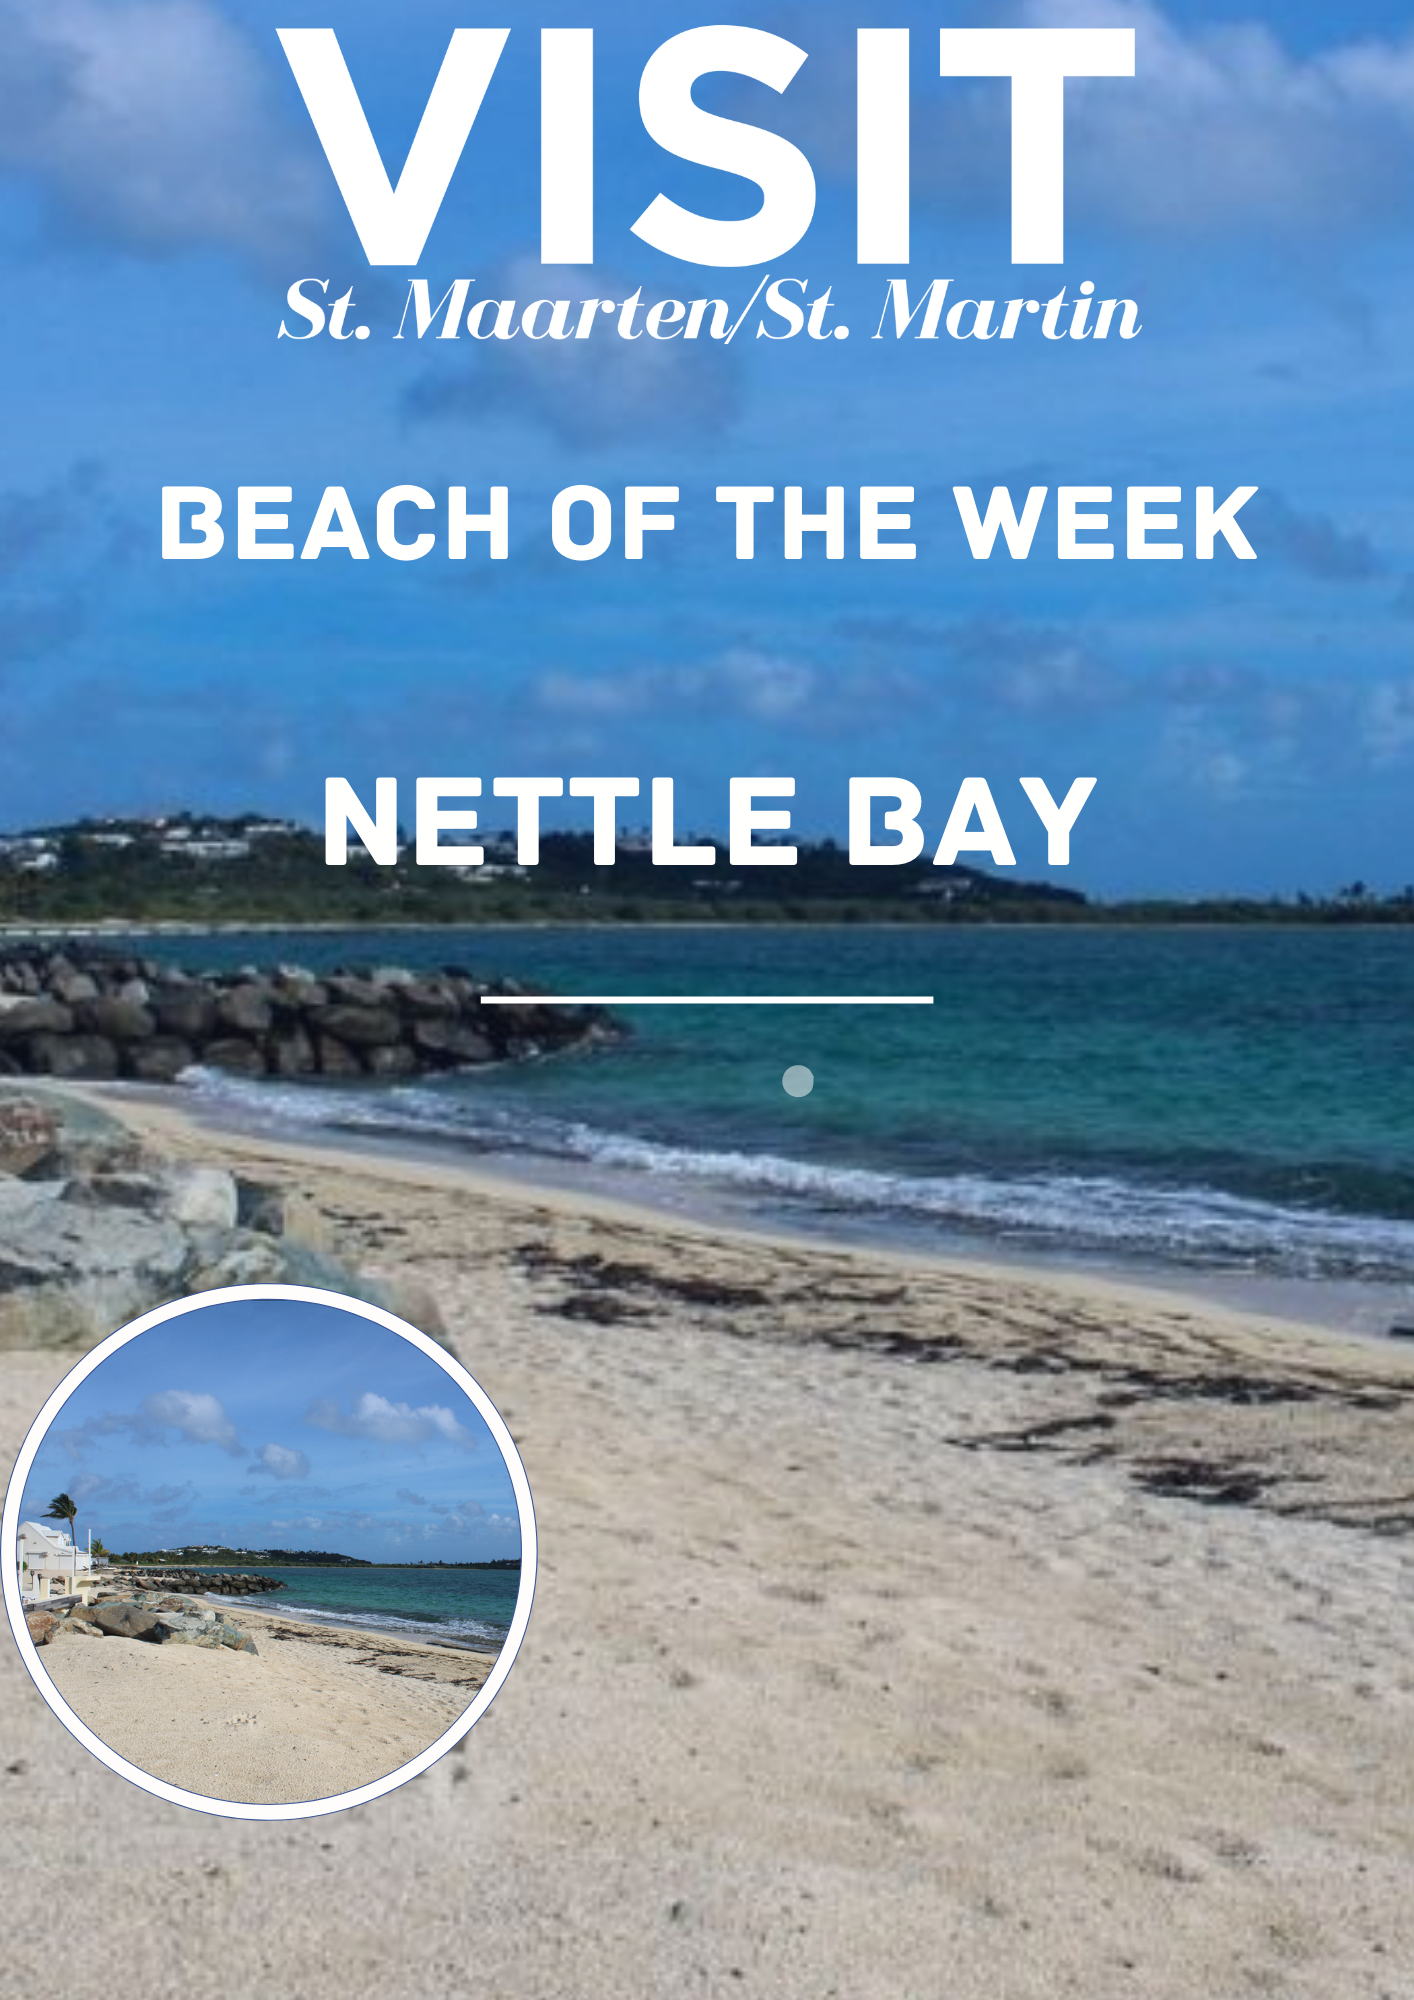 Nettle Bay for Beach of the week.